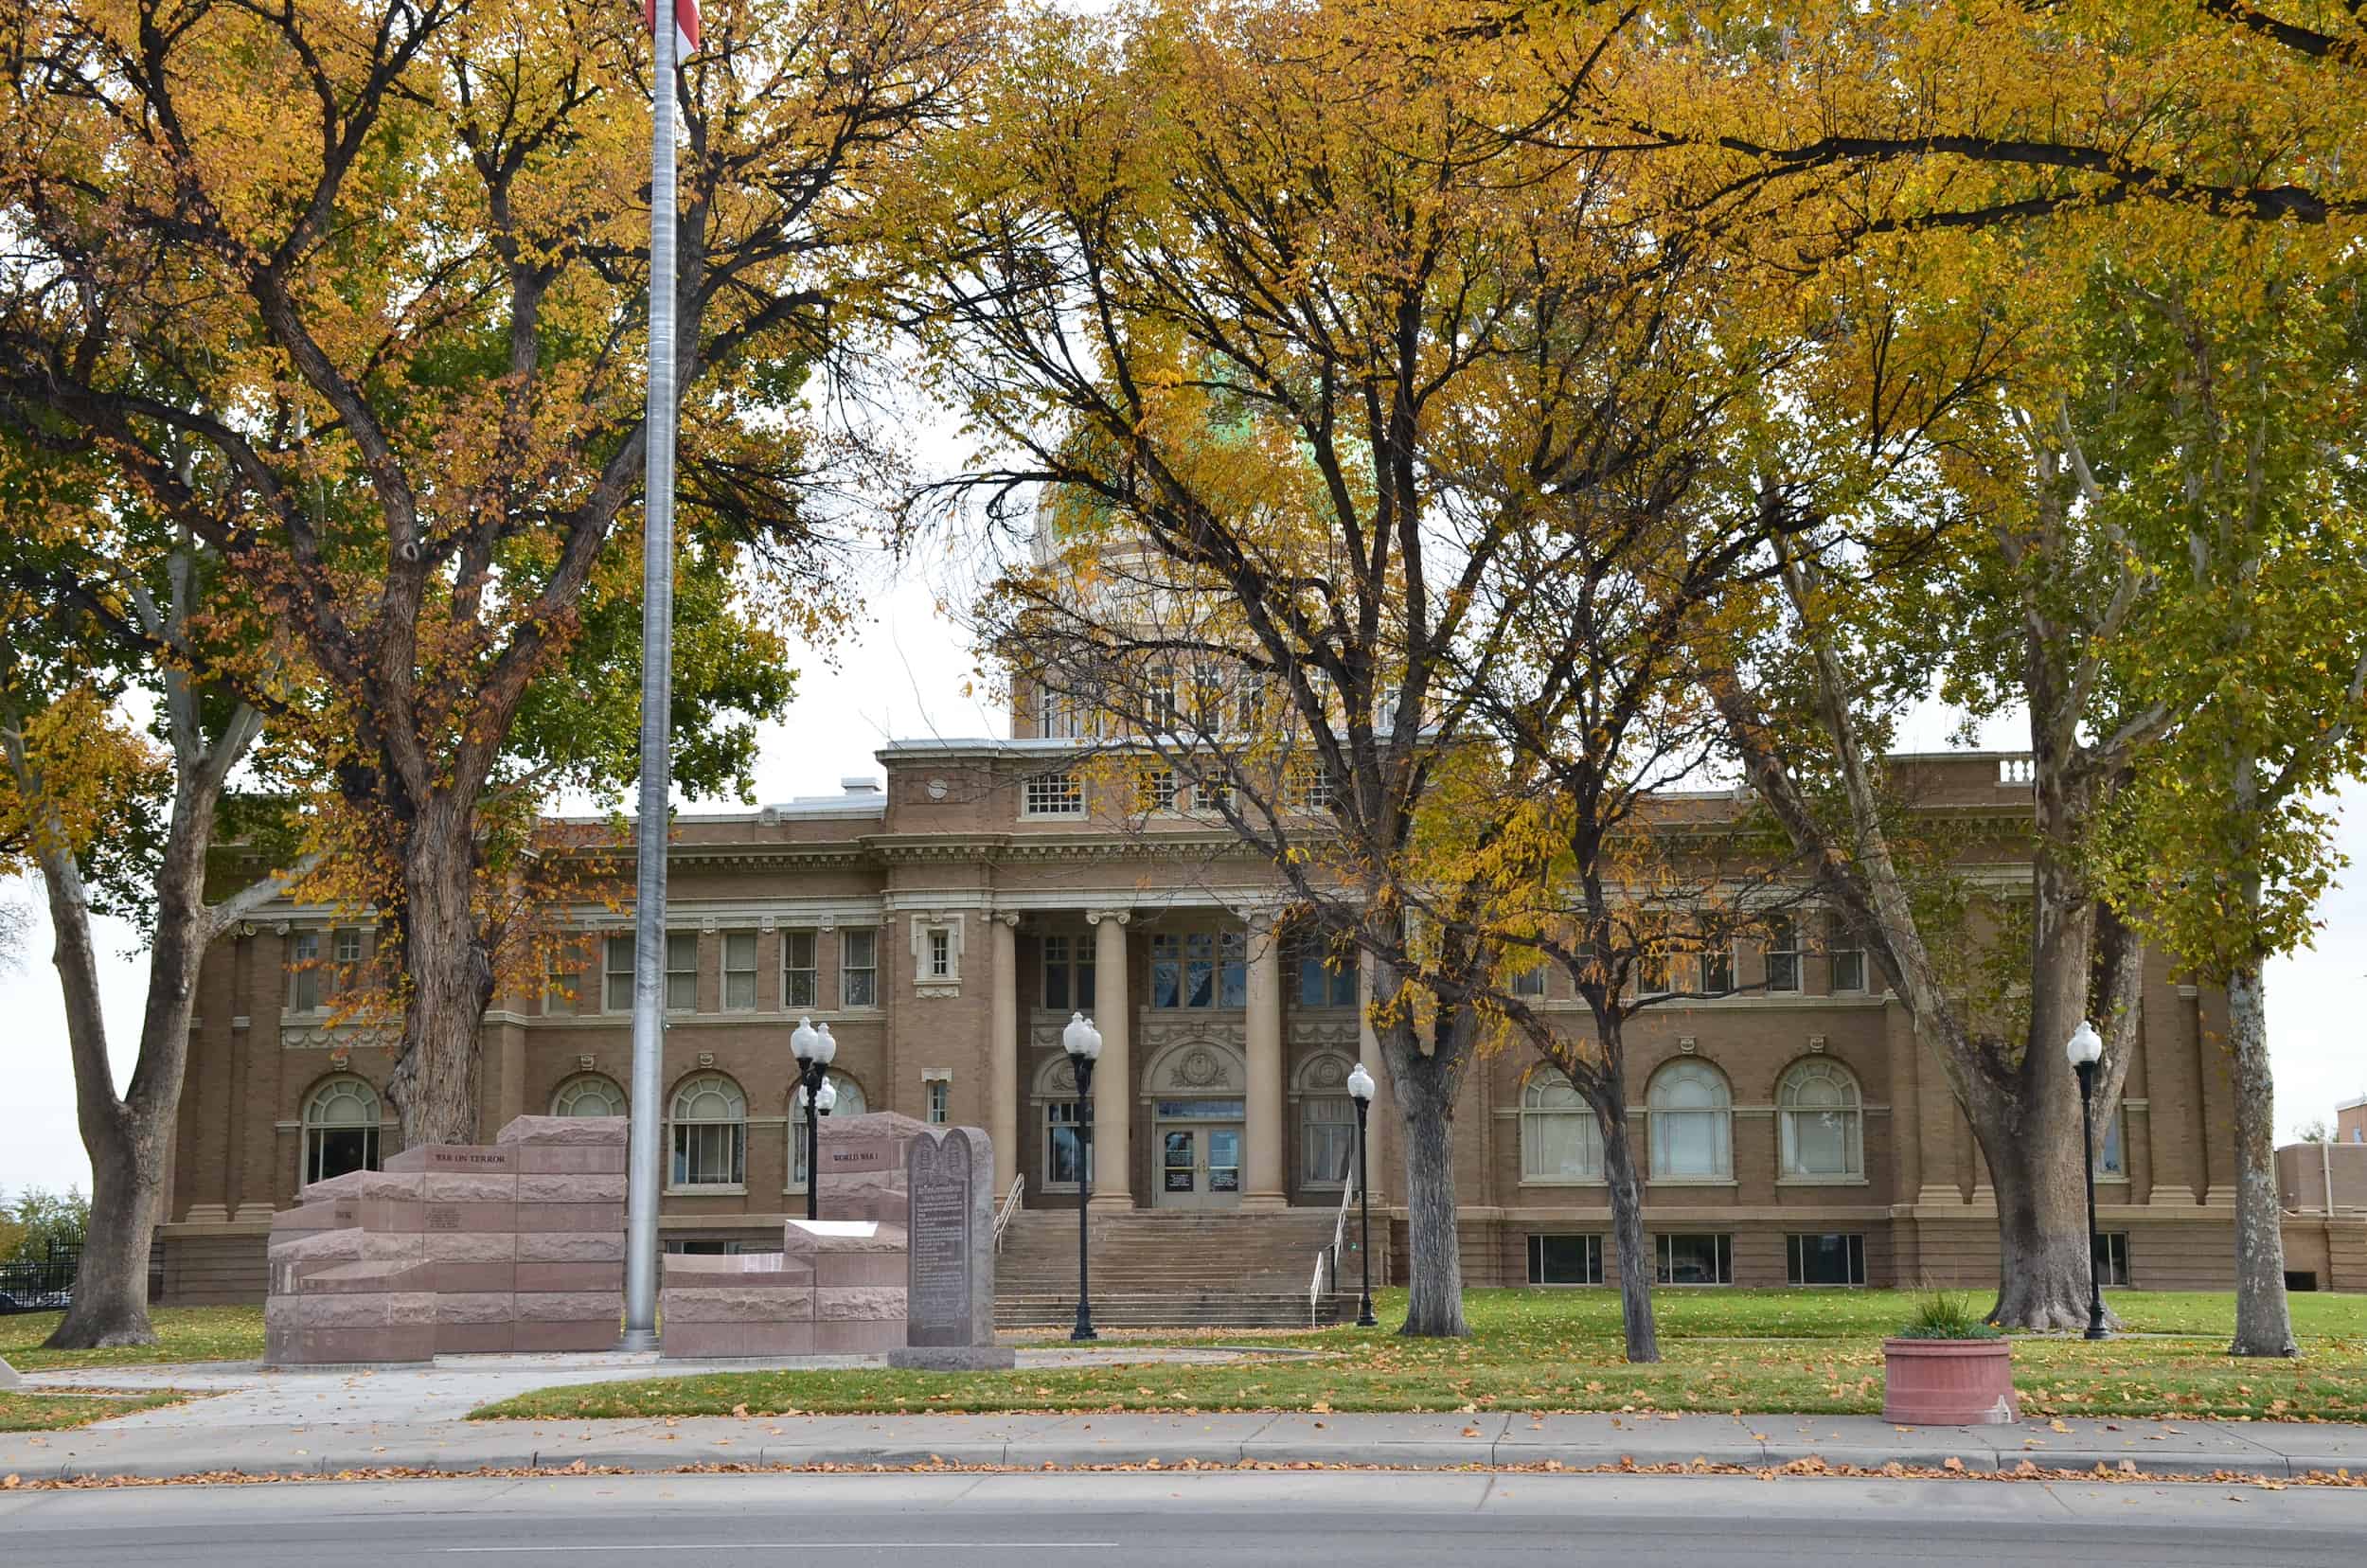 Chaves County Courthouse in Roswell, New Mexico